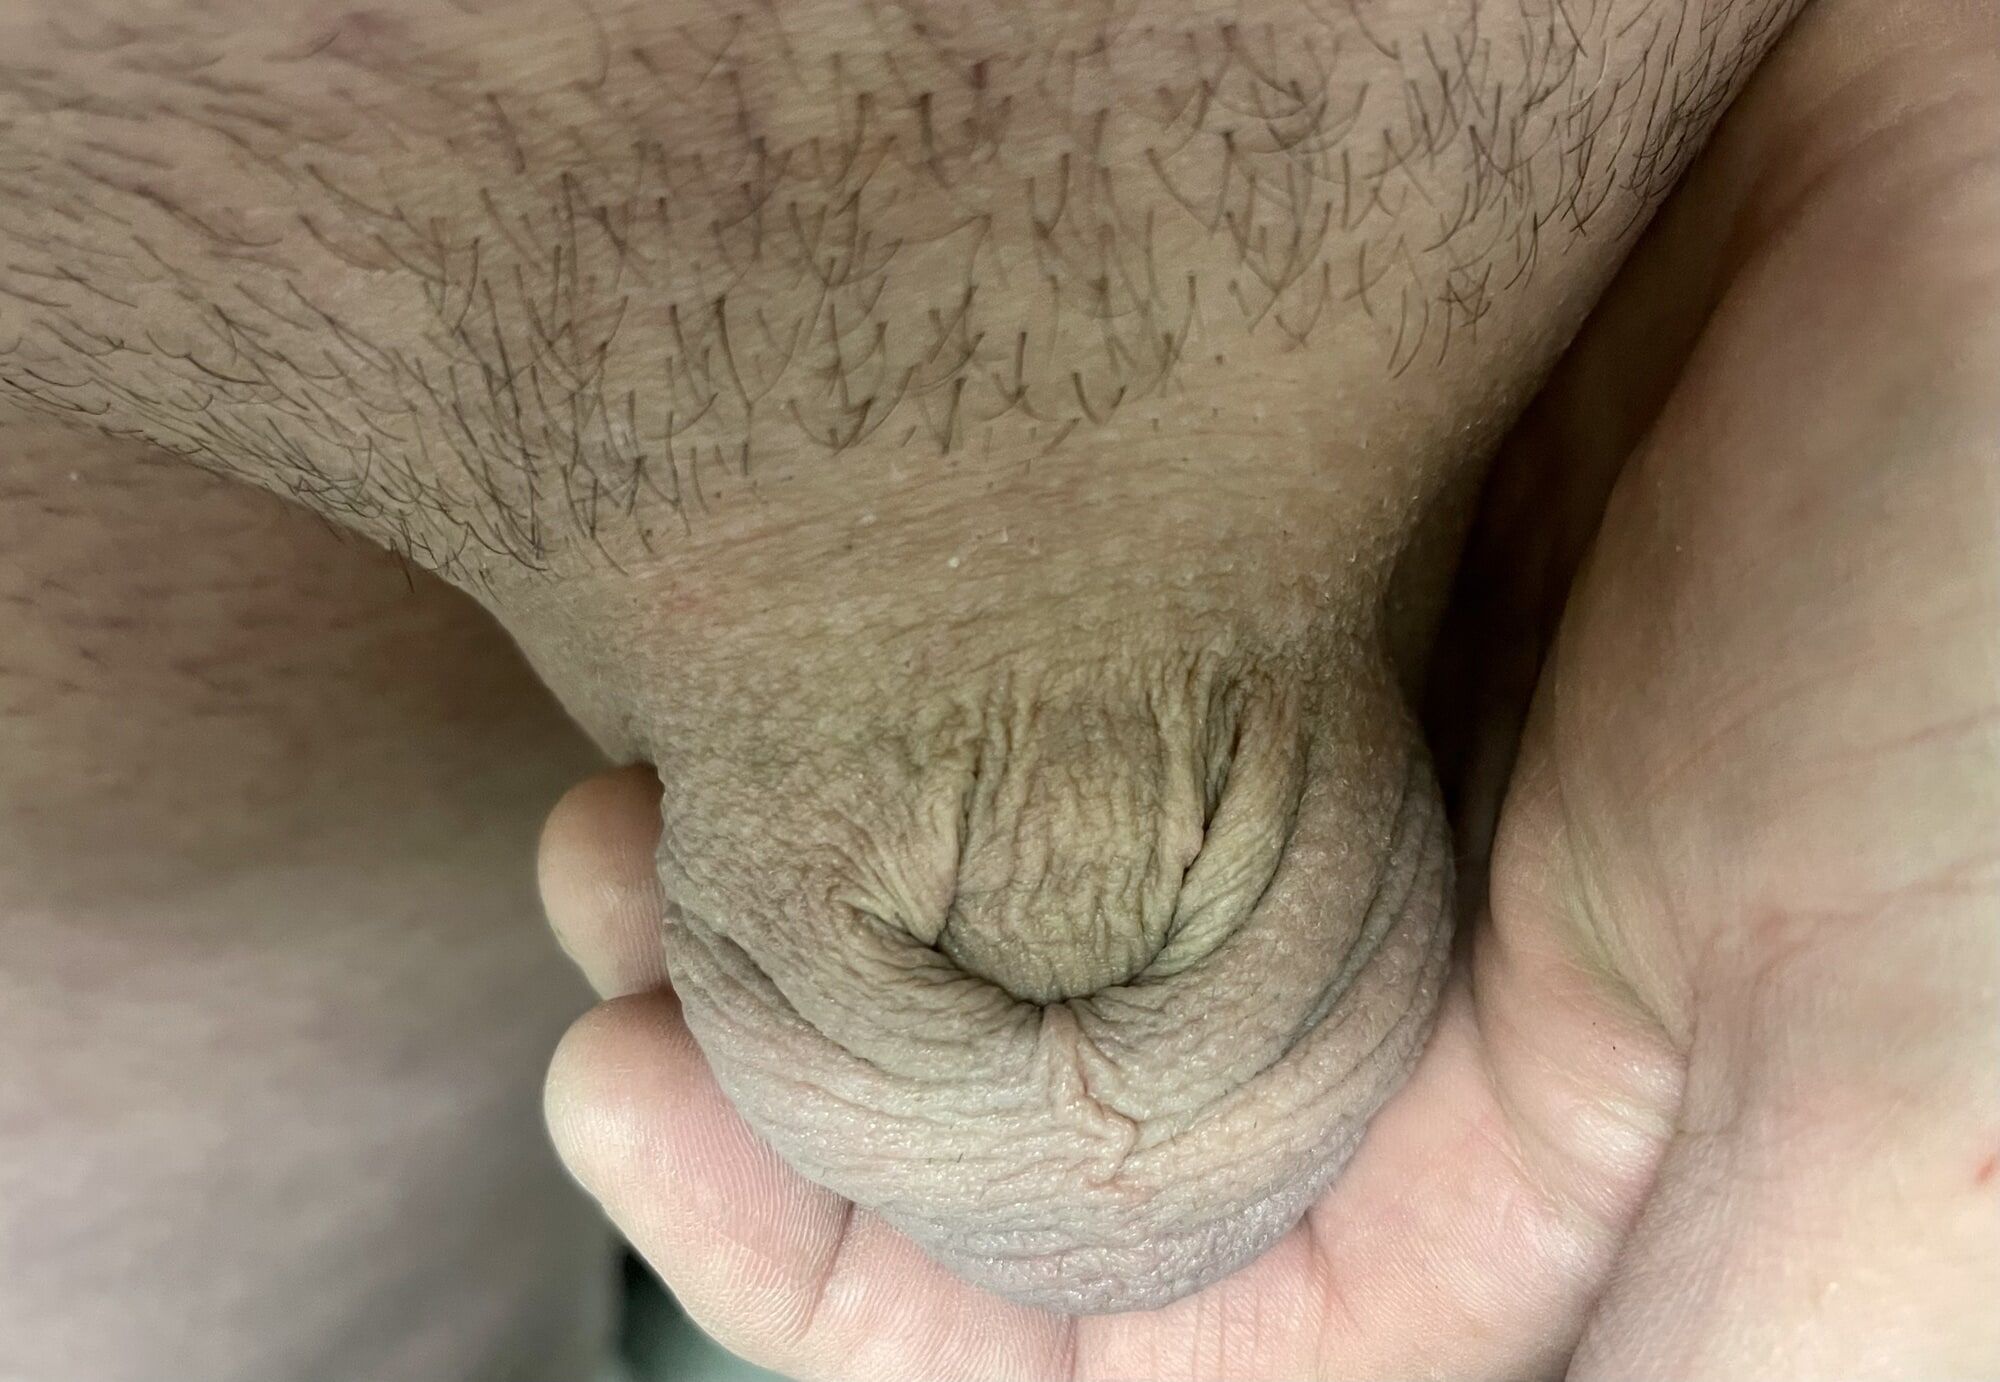 Me and my inverted cock #2